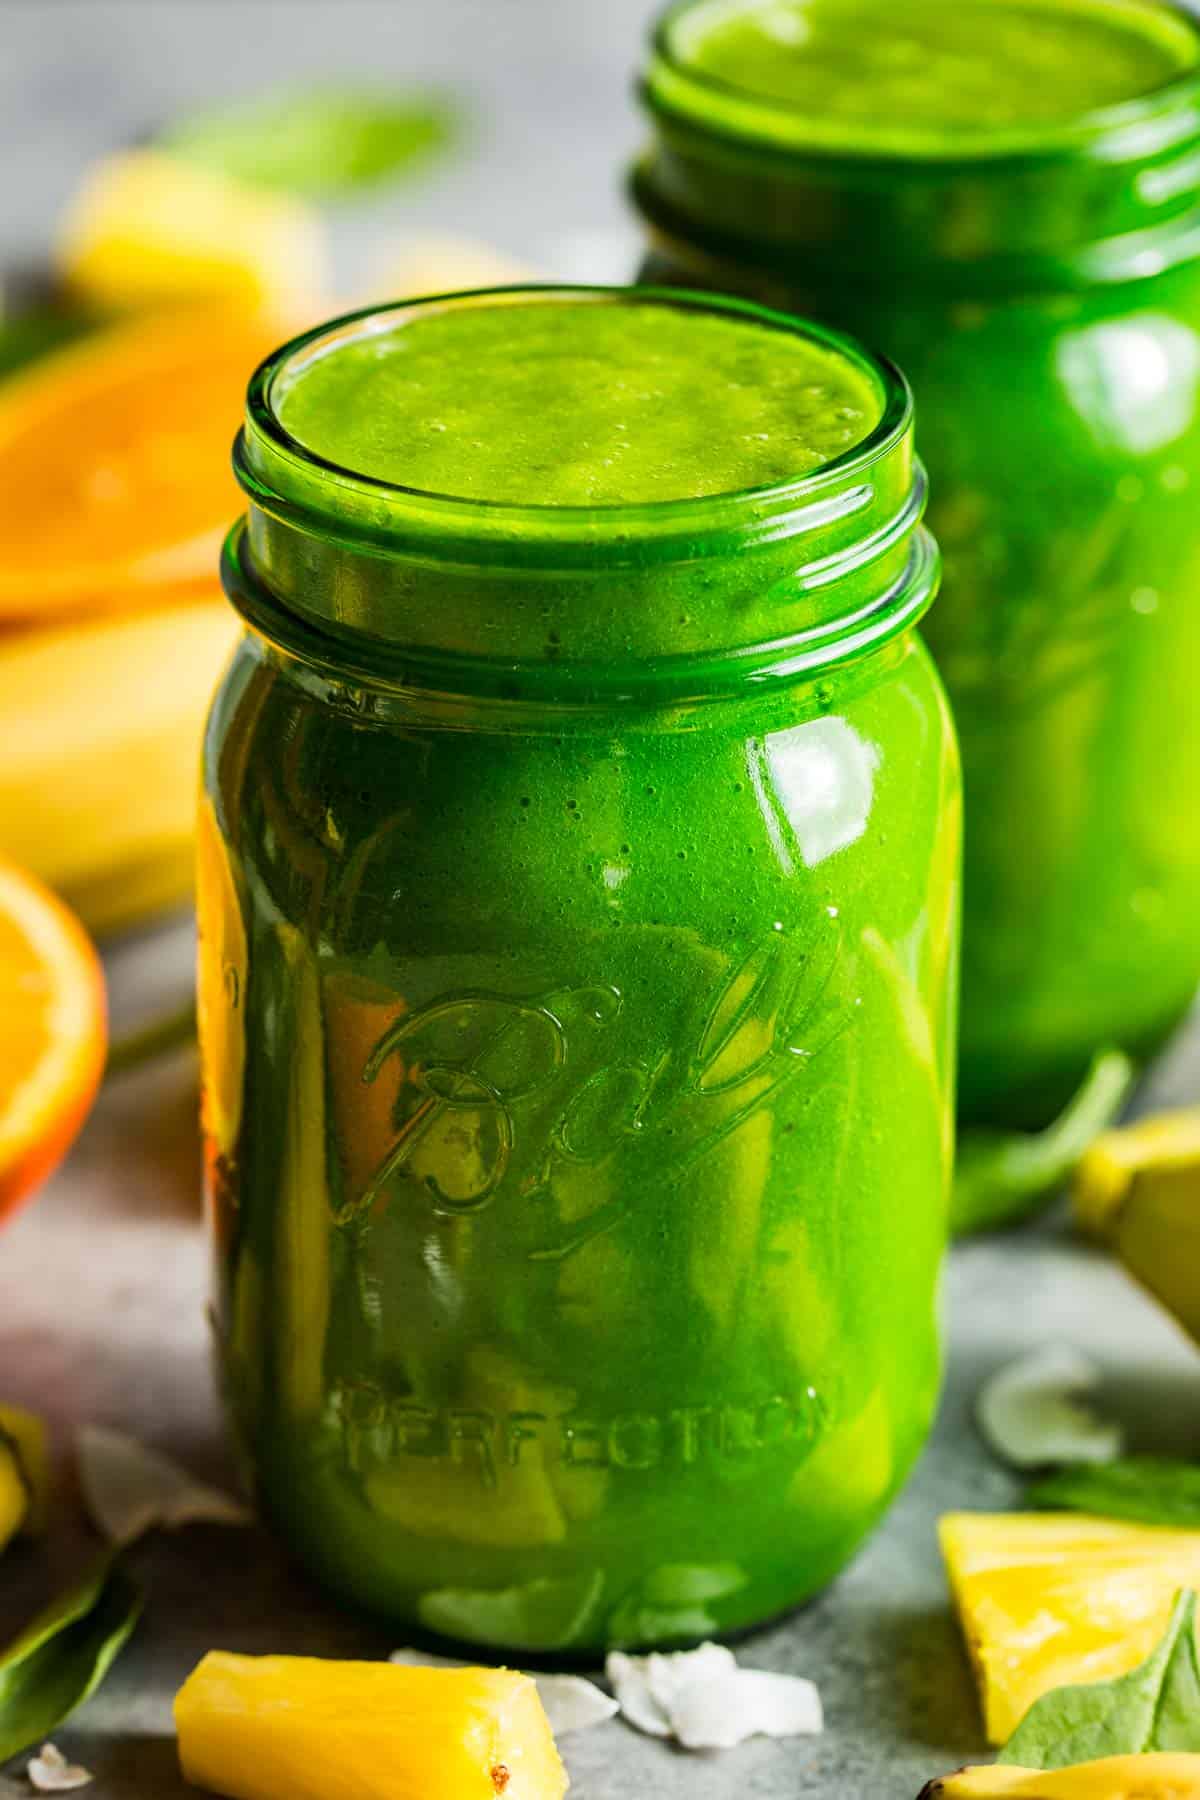 Two green jars of tropical green smoothie surrounded by pineapple pieces, flaked coconut, a banana, and sliced oranges.